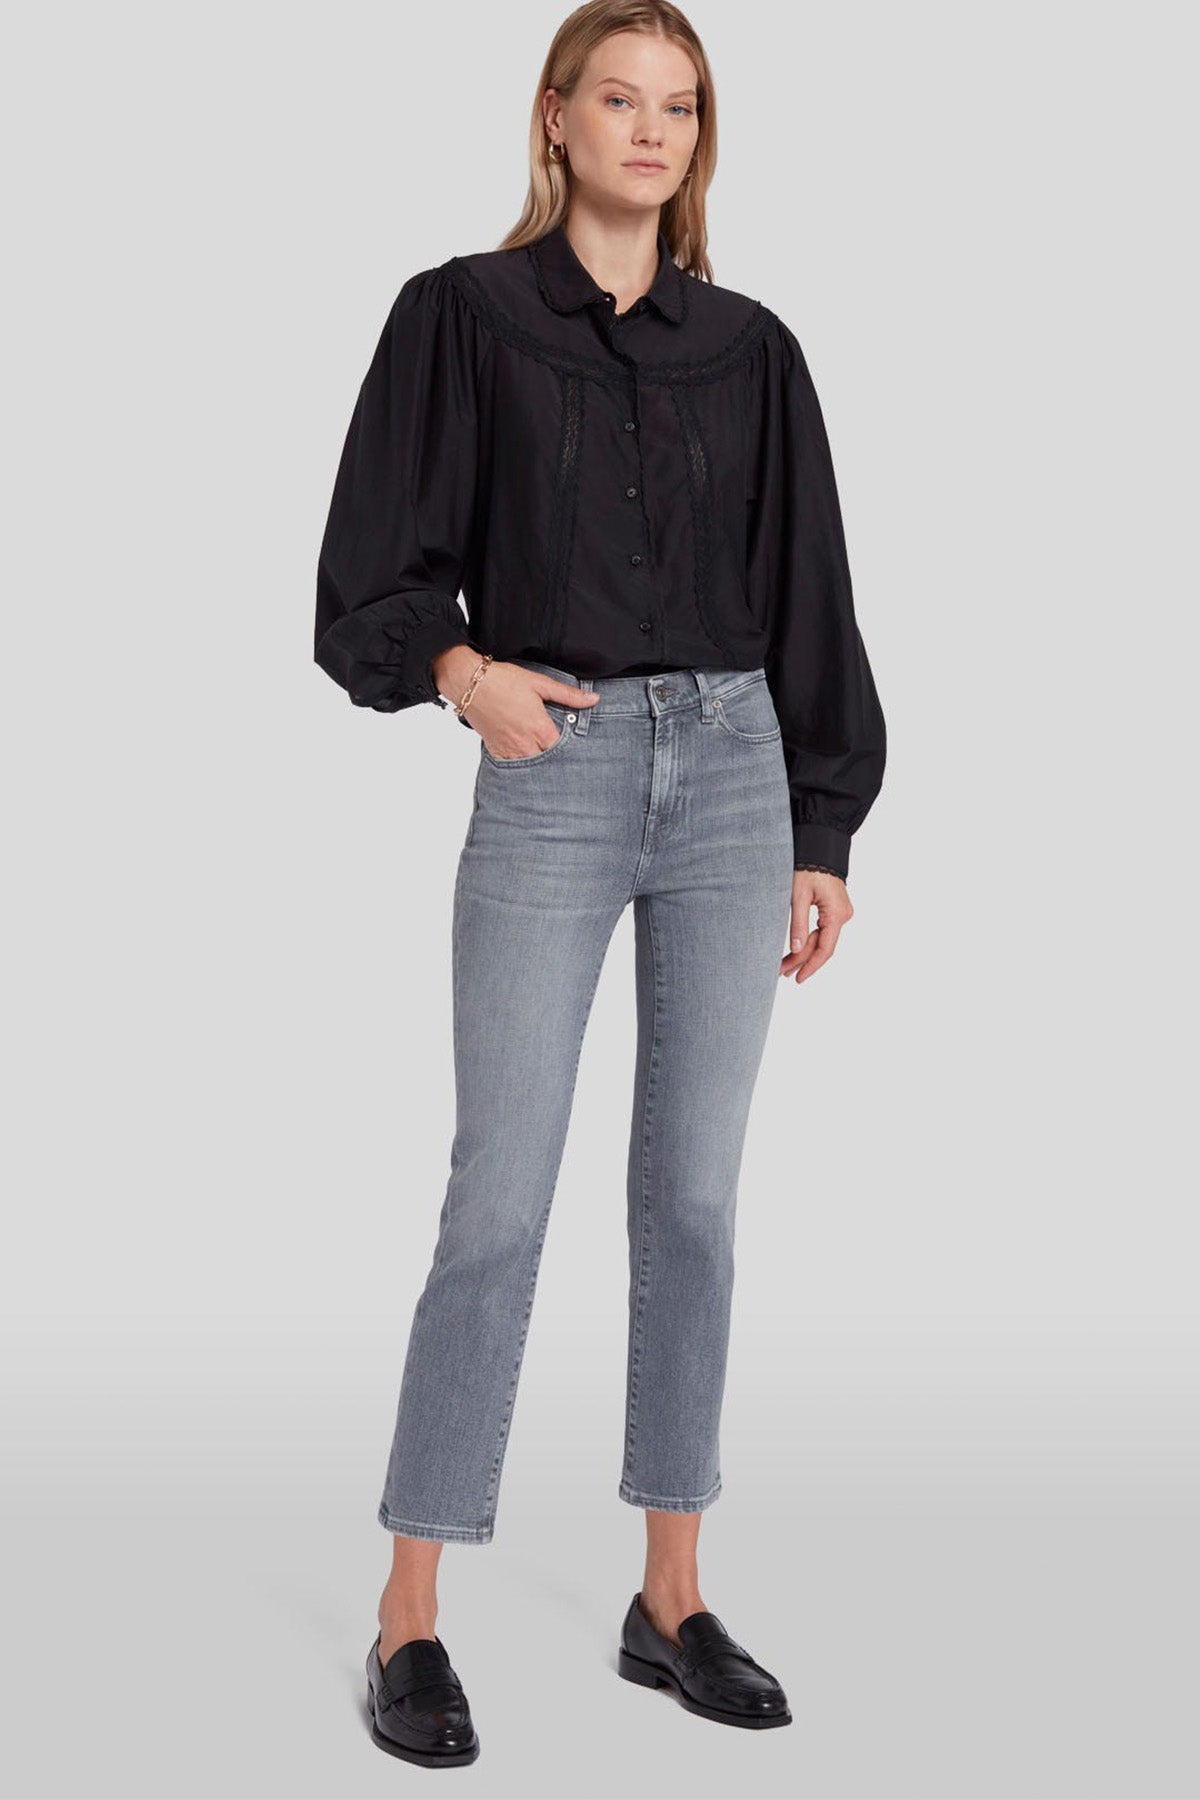 7 For All Mankind The Straight Crop Slim Fit Jeans